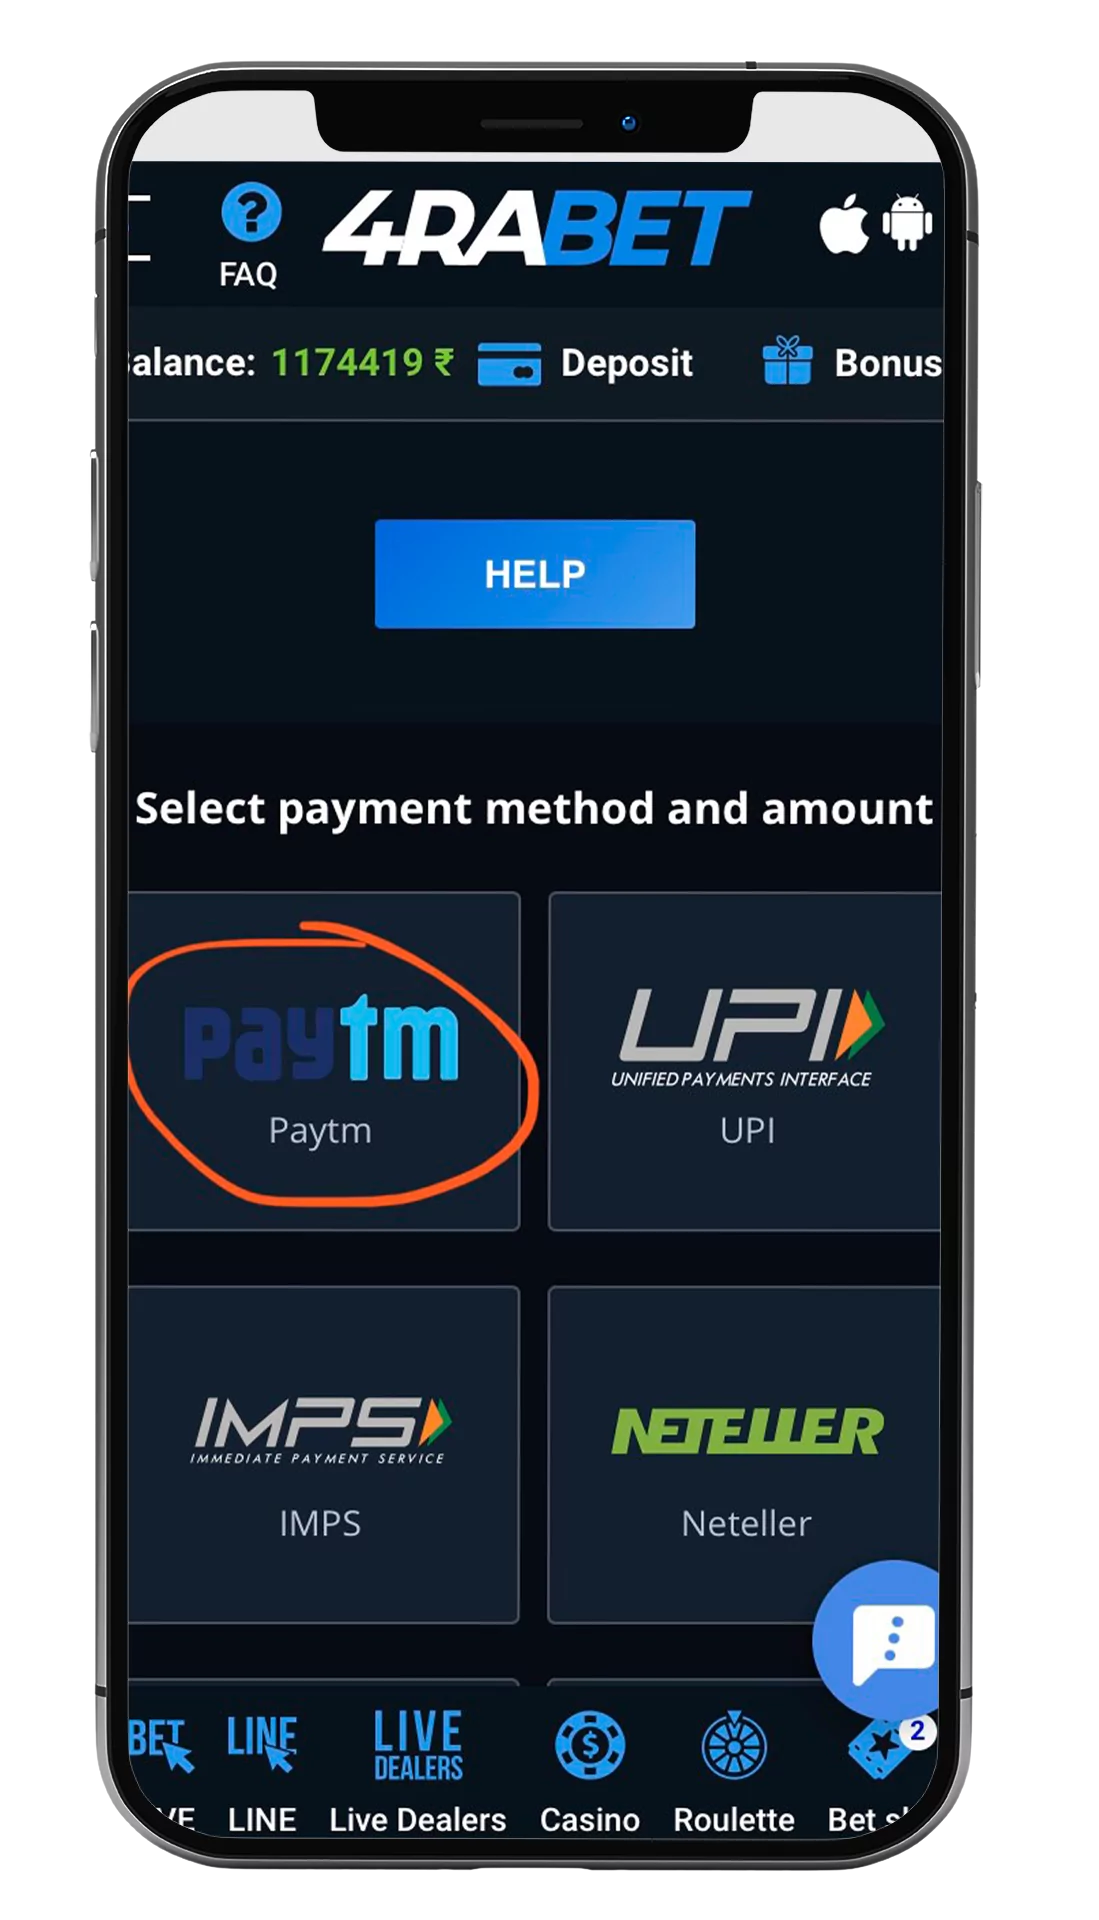 You can choose Paytm as a very convenient and popular payment system in India.